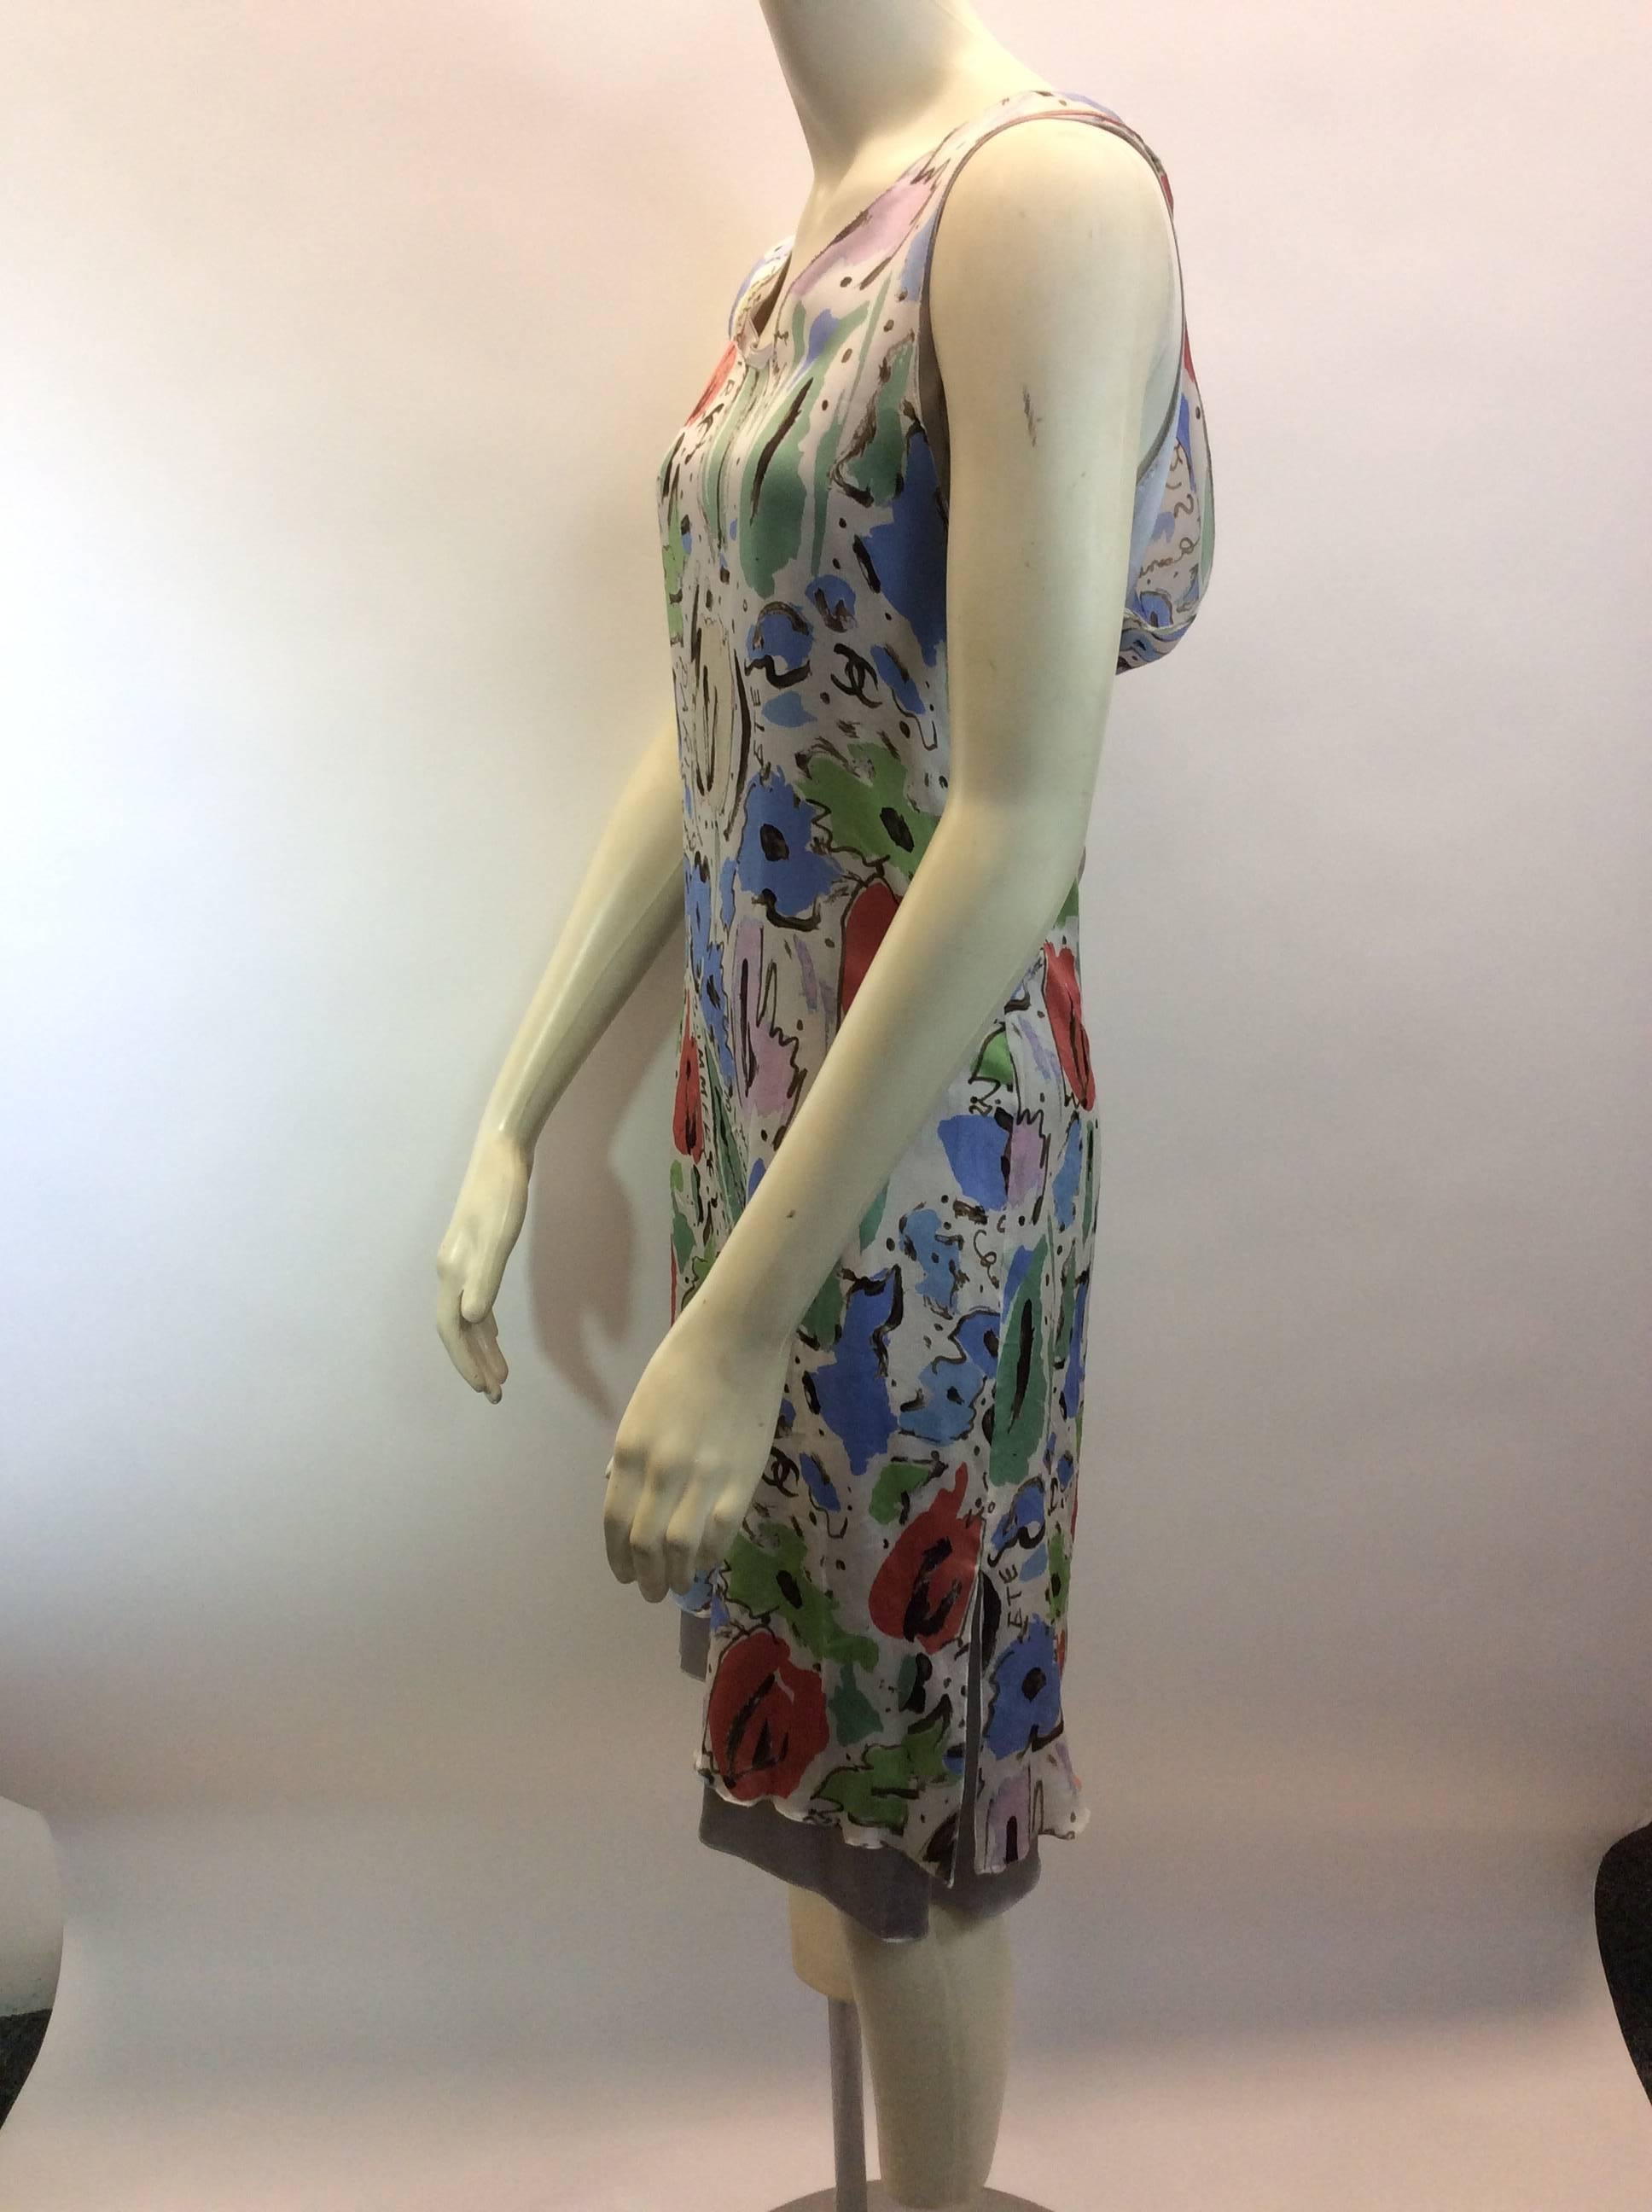 Chanel Multi-color Print Silk Dress
100% SIlk
No size noted
Length 37